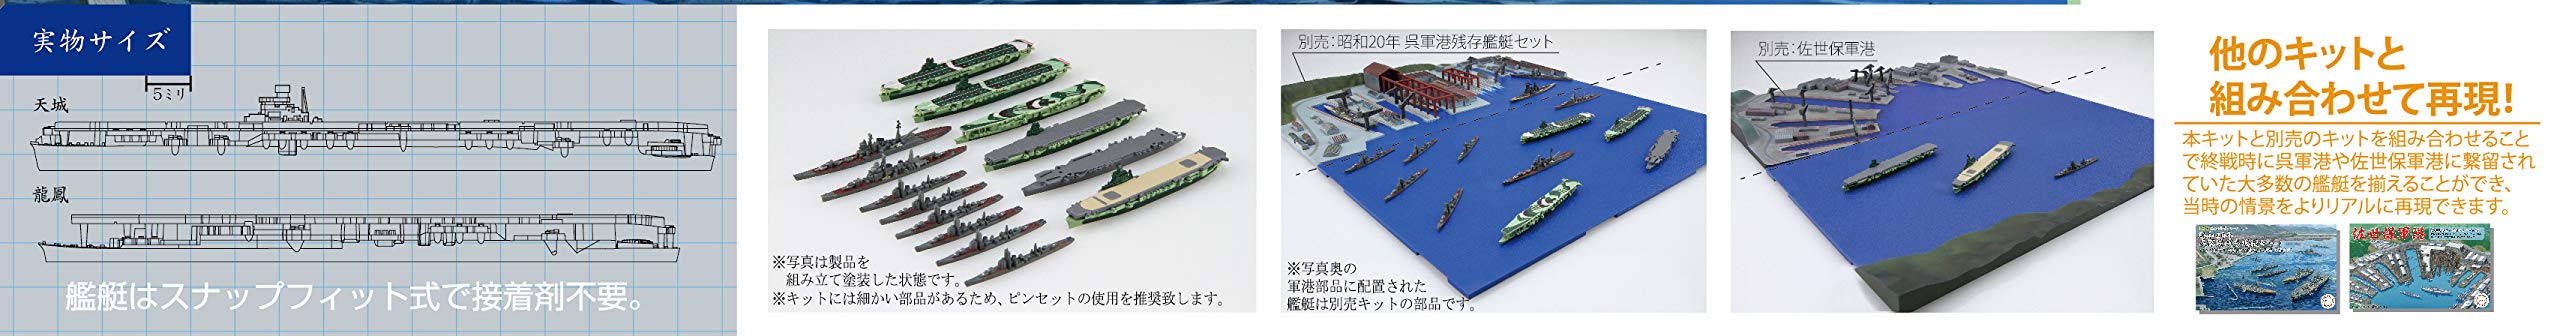 Fujimi Model 1/3000 Collectable Warship Series No.19 Survival Ship Set Am Ende des Krieges (Typ Unryu/Typ Ryuho/Typ Hitaka/Aoba) Plastikmodell Kriegsschiff 19